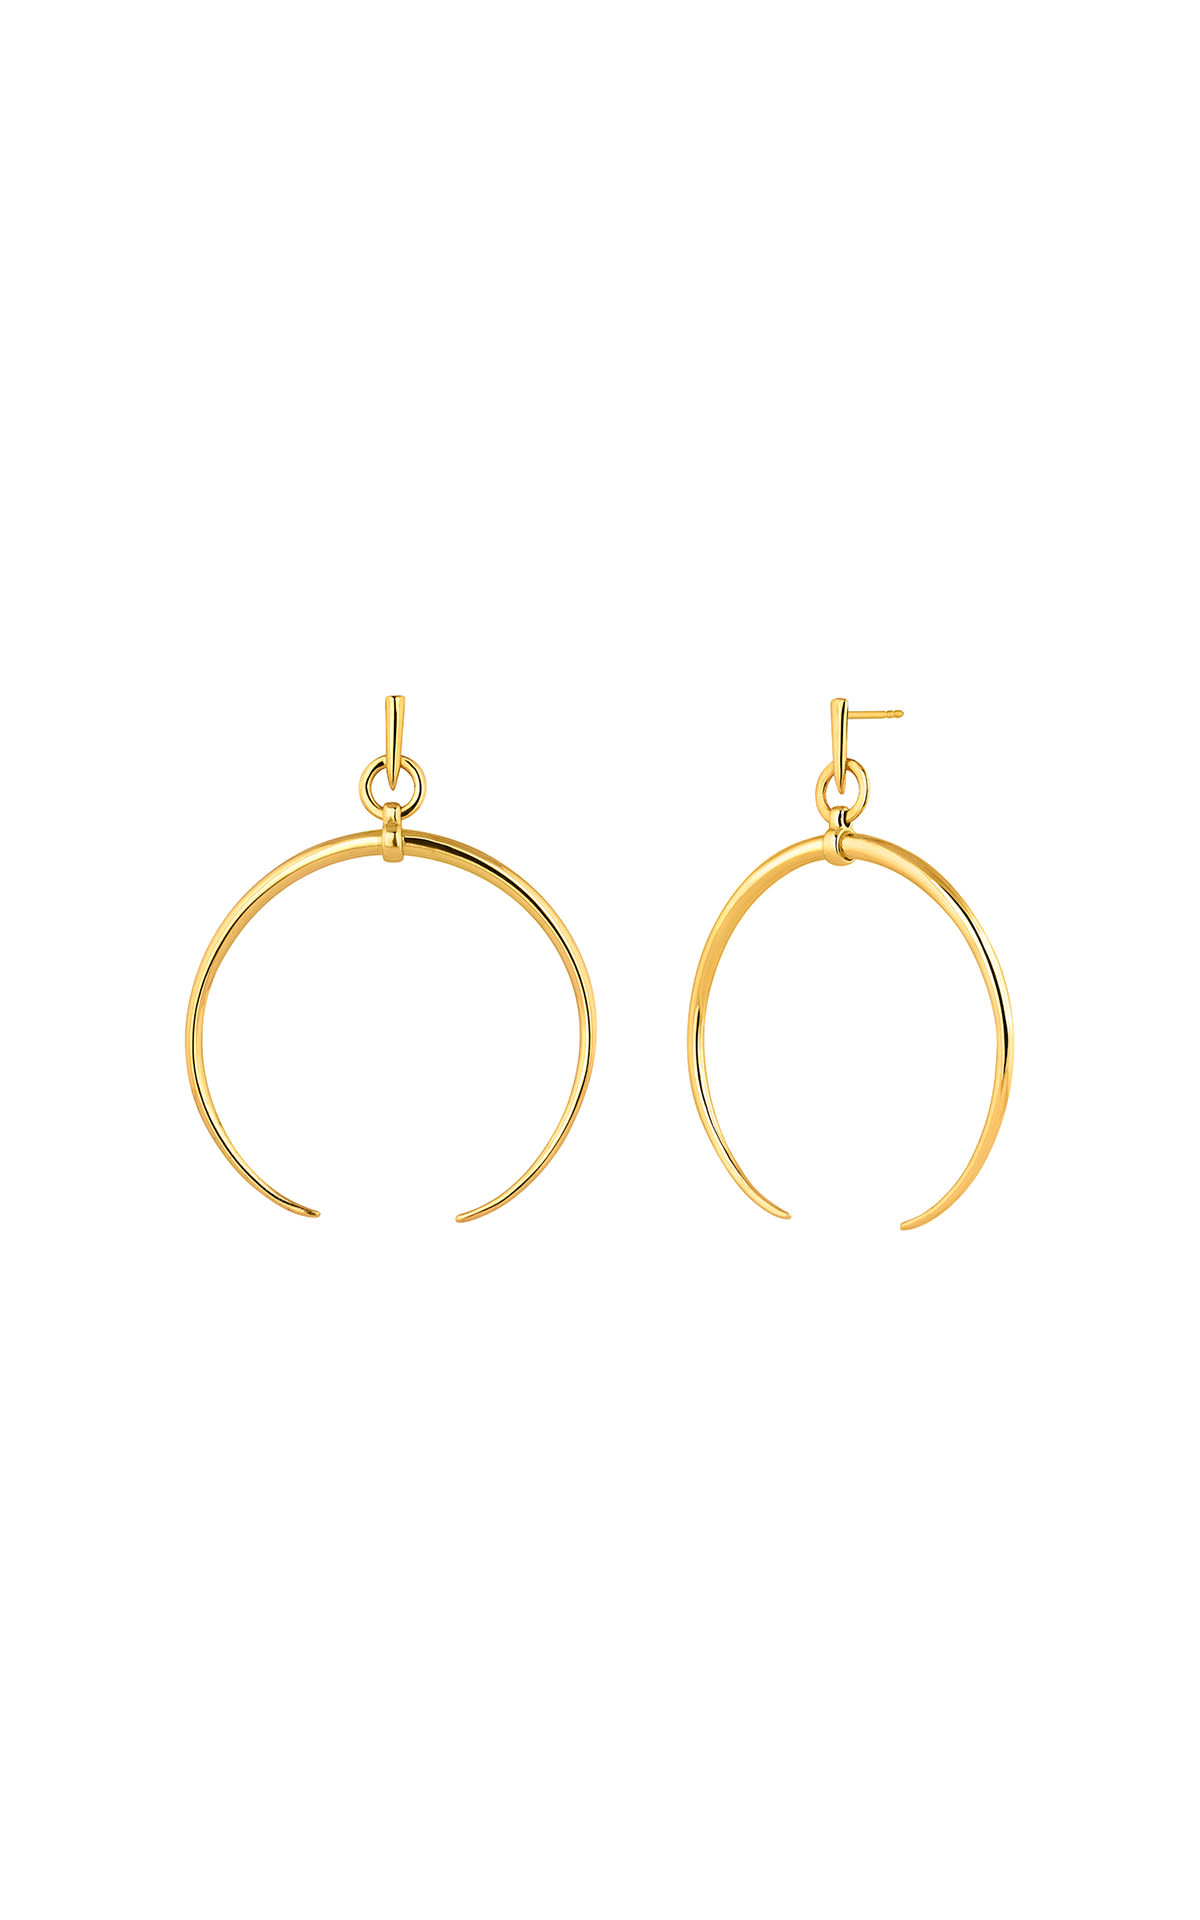 Half moon gold earrings aritocrazy